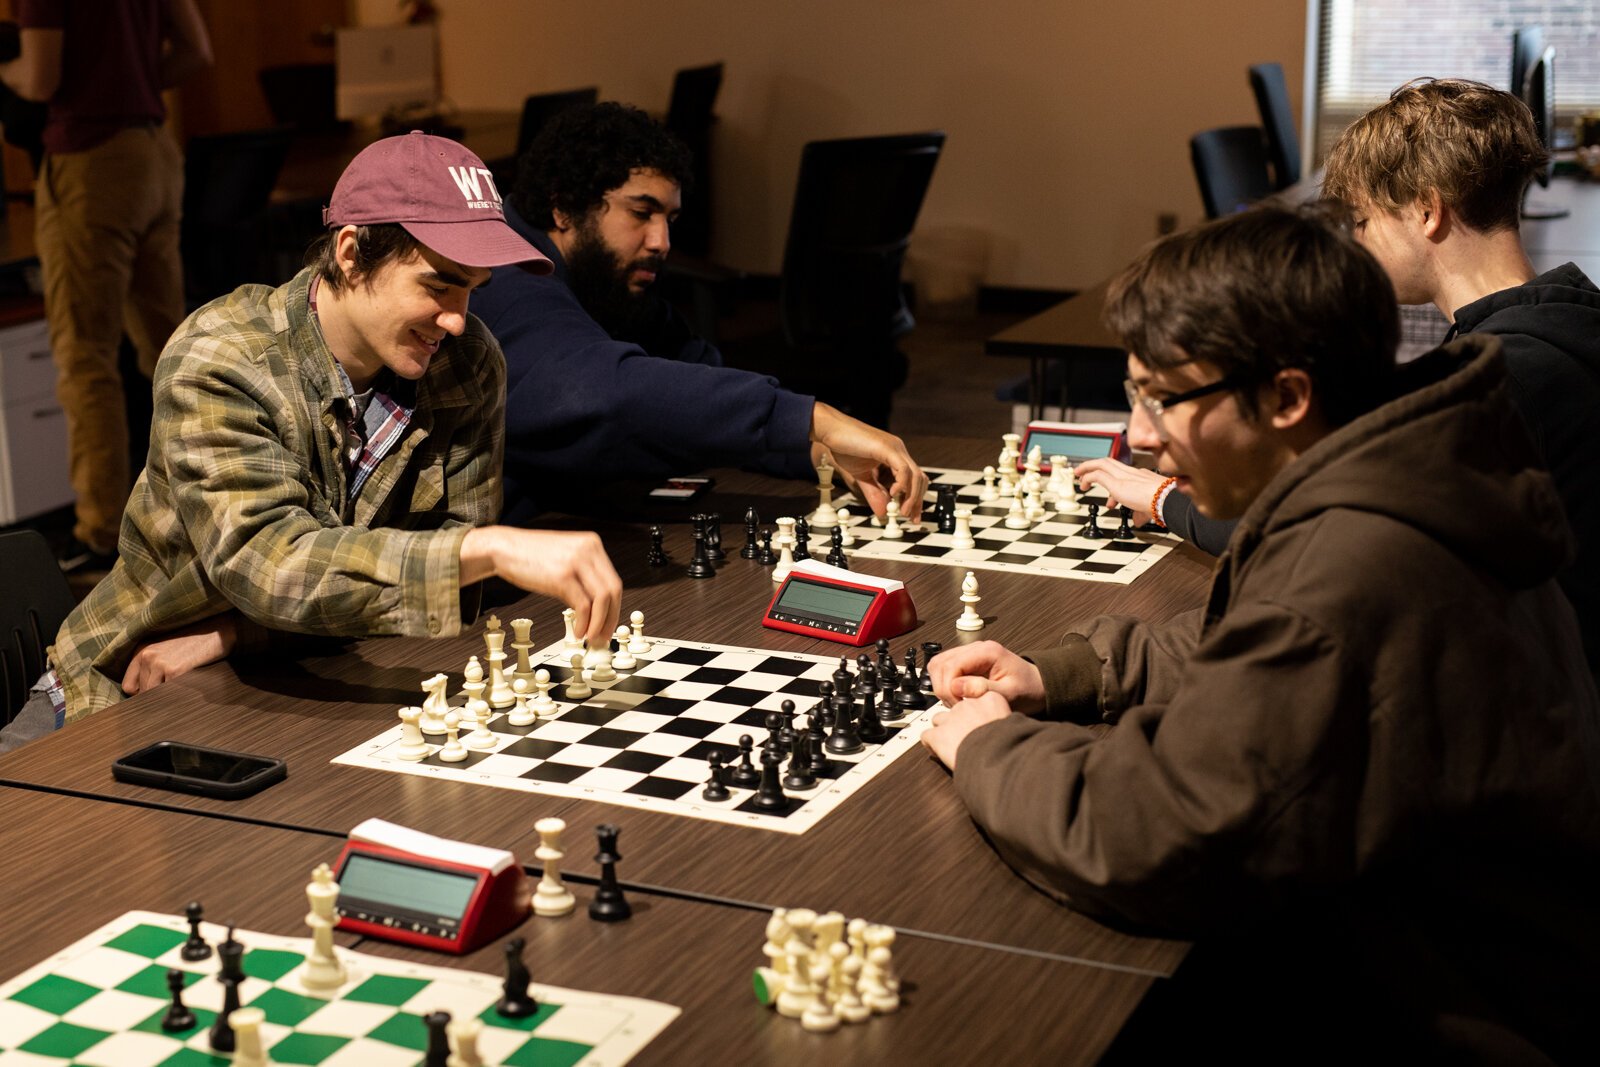 Chess meets in Fort Wayne are building community bonds during pandemic times.